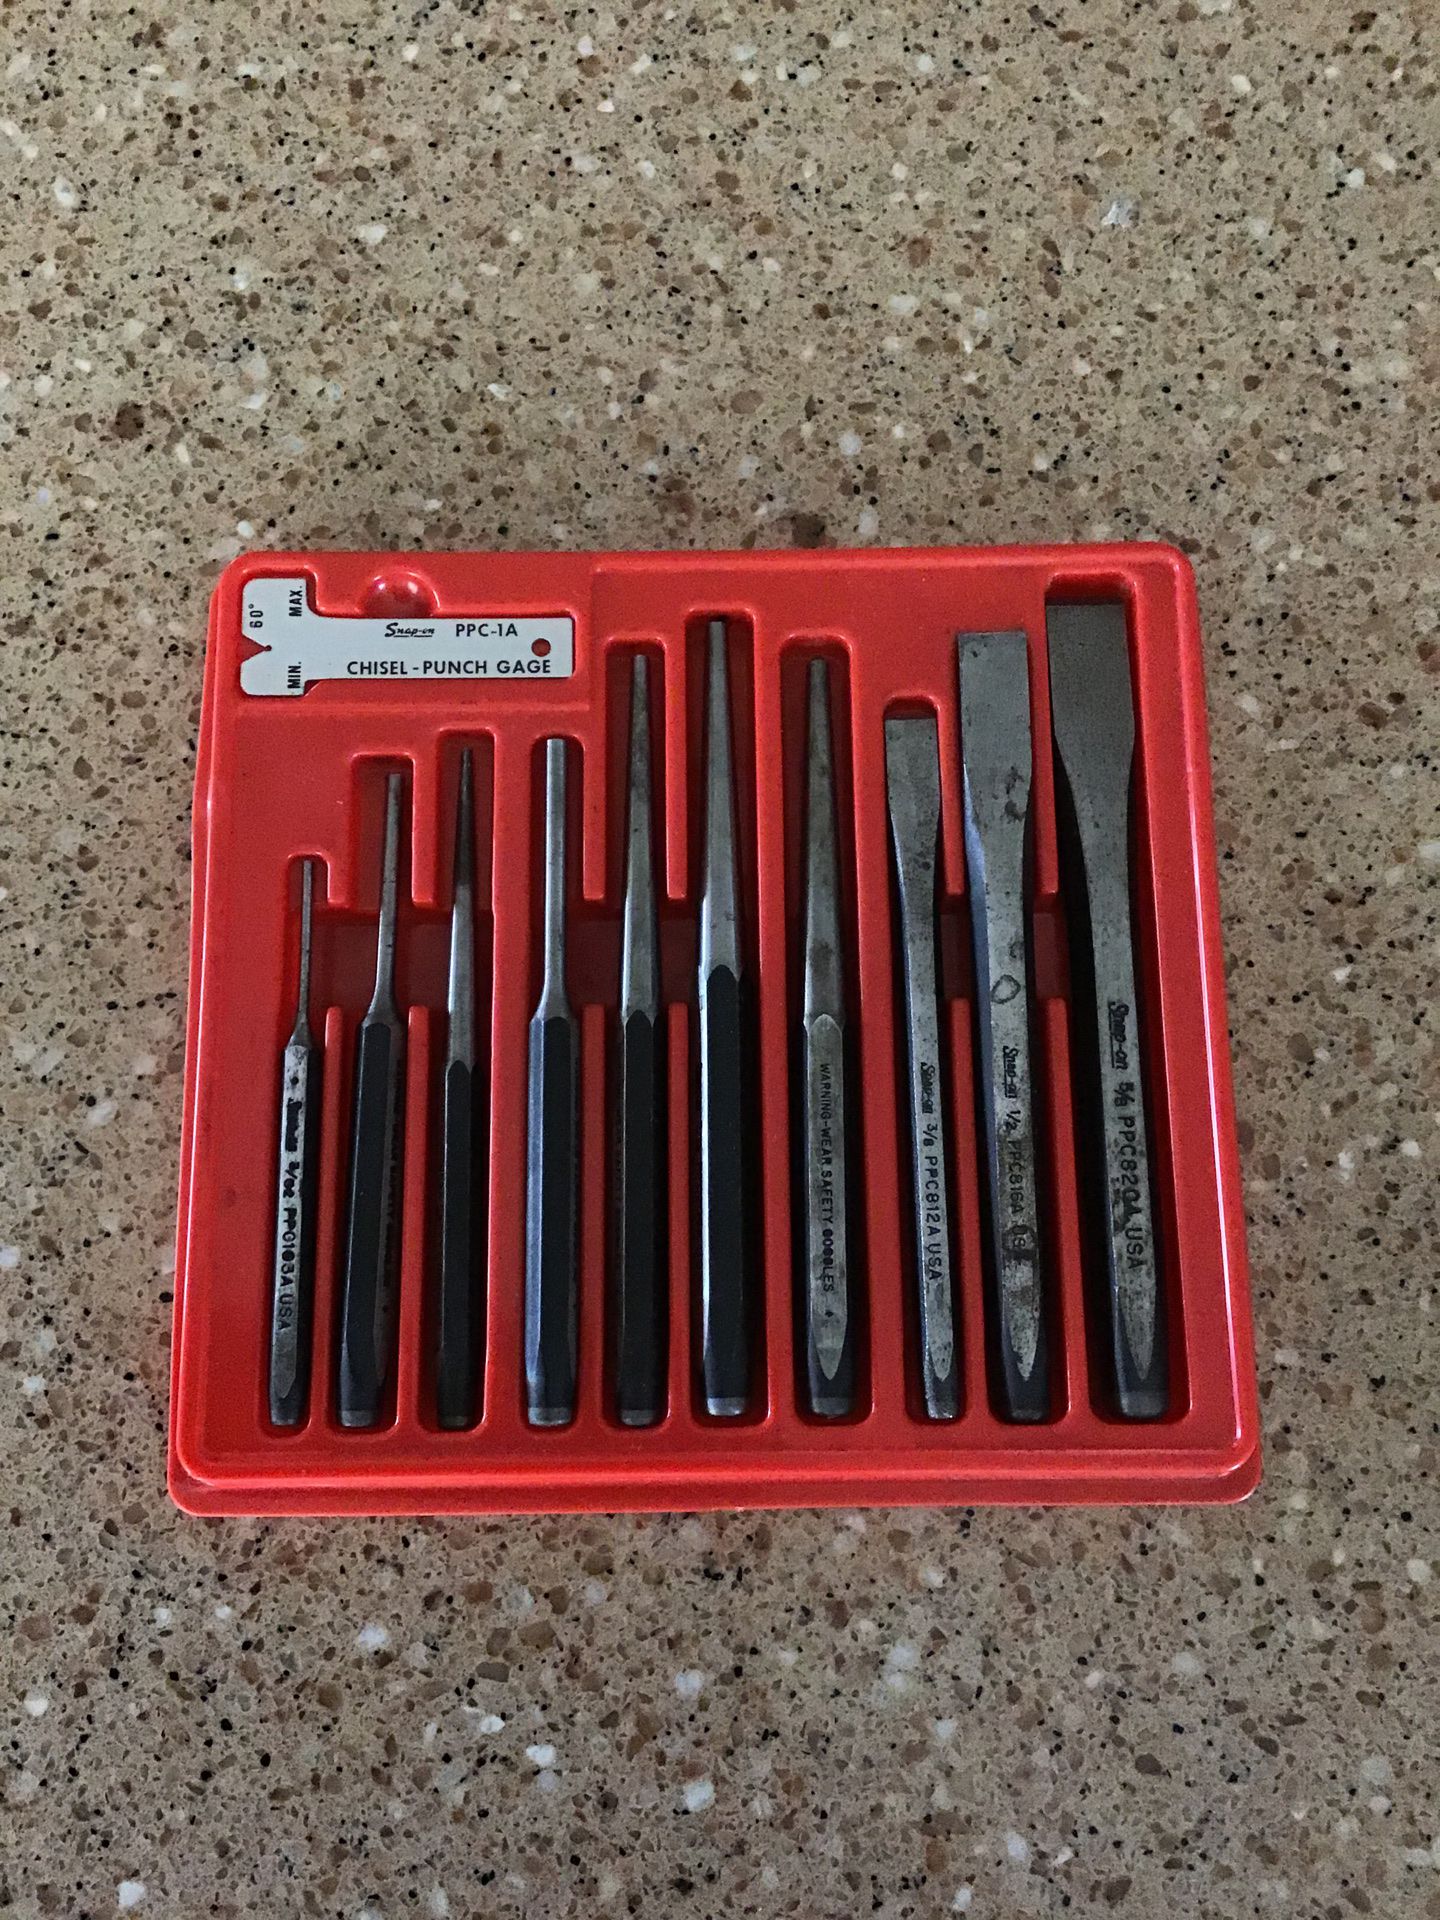 Snap-on Tools 11 piece Punch & Chisle Set. NO LOW BALLERS PLEASE!